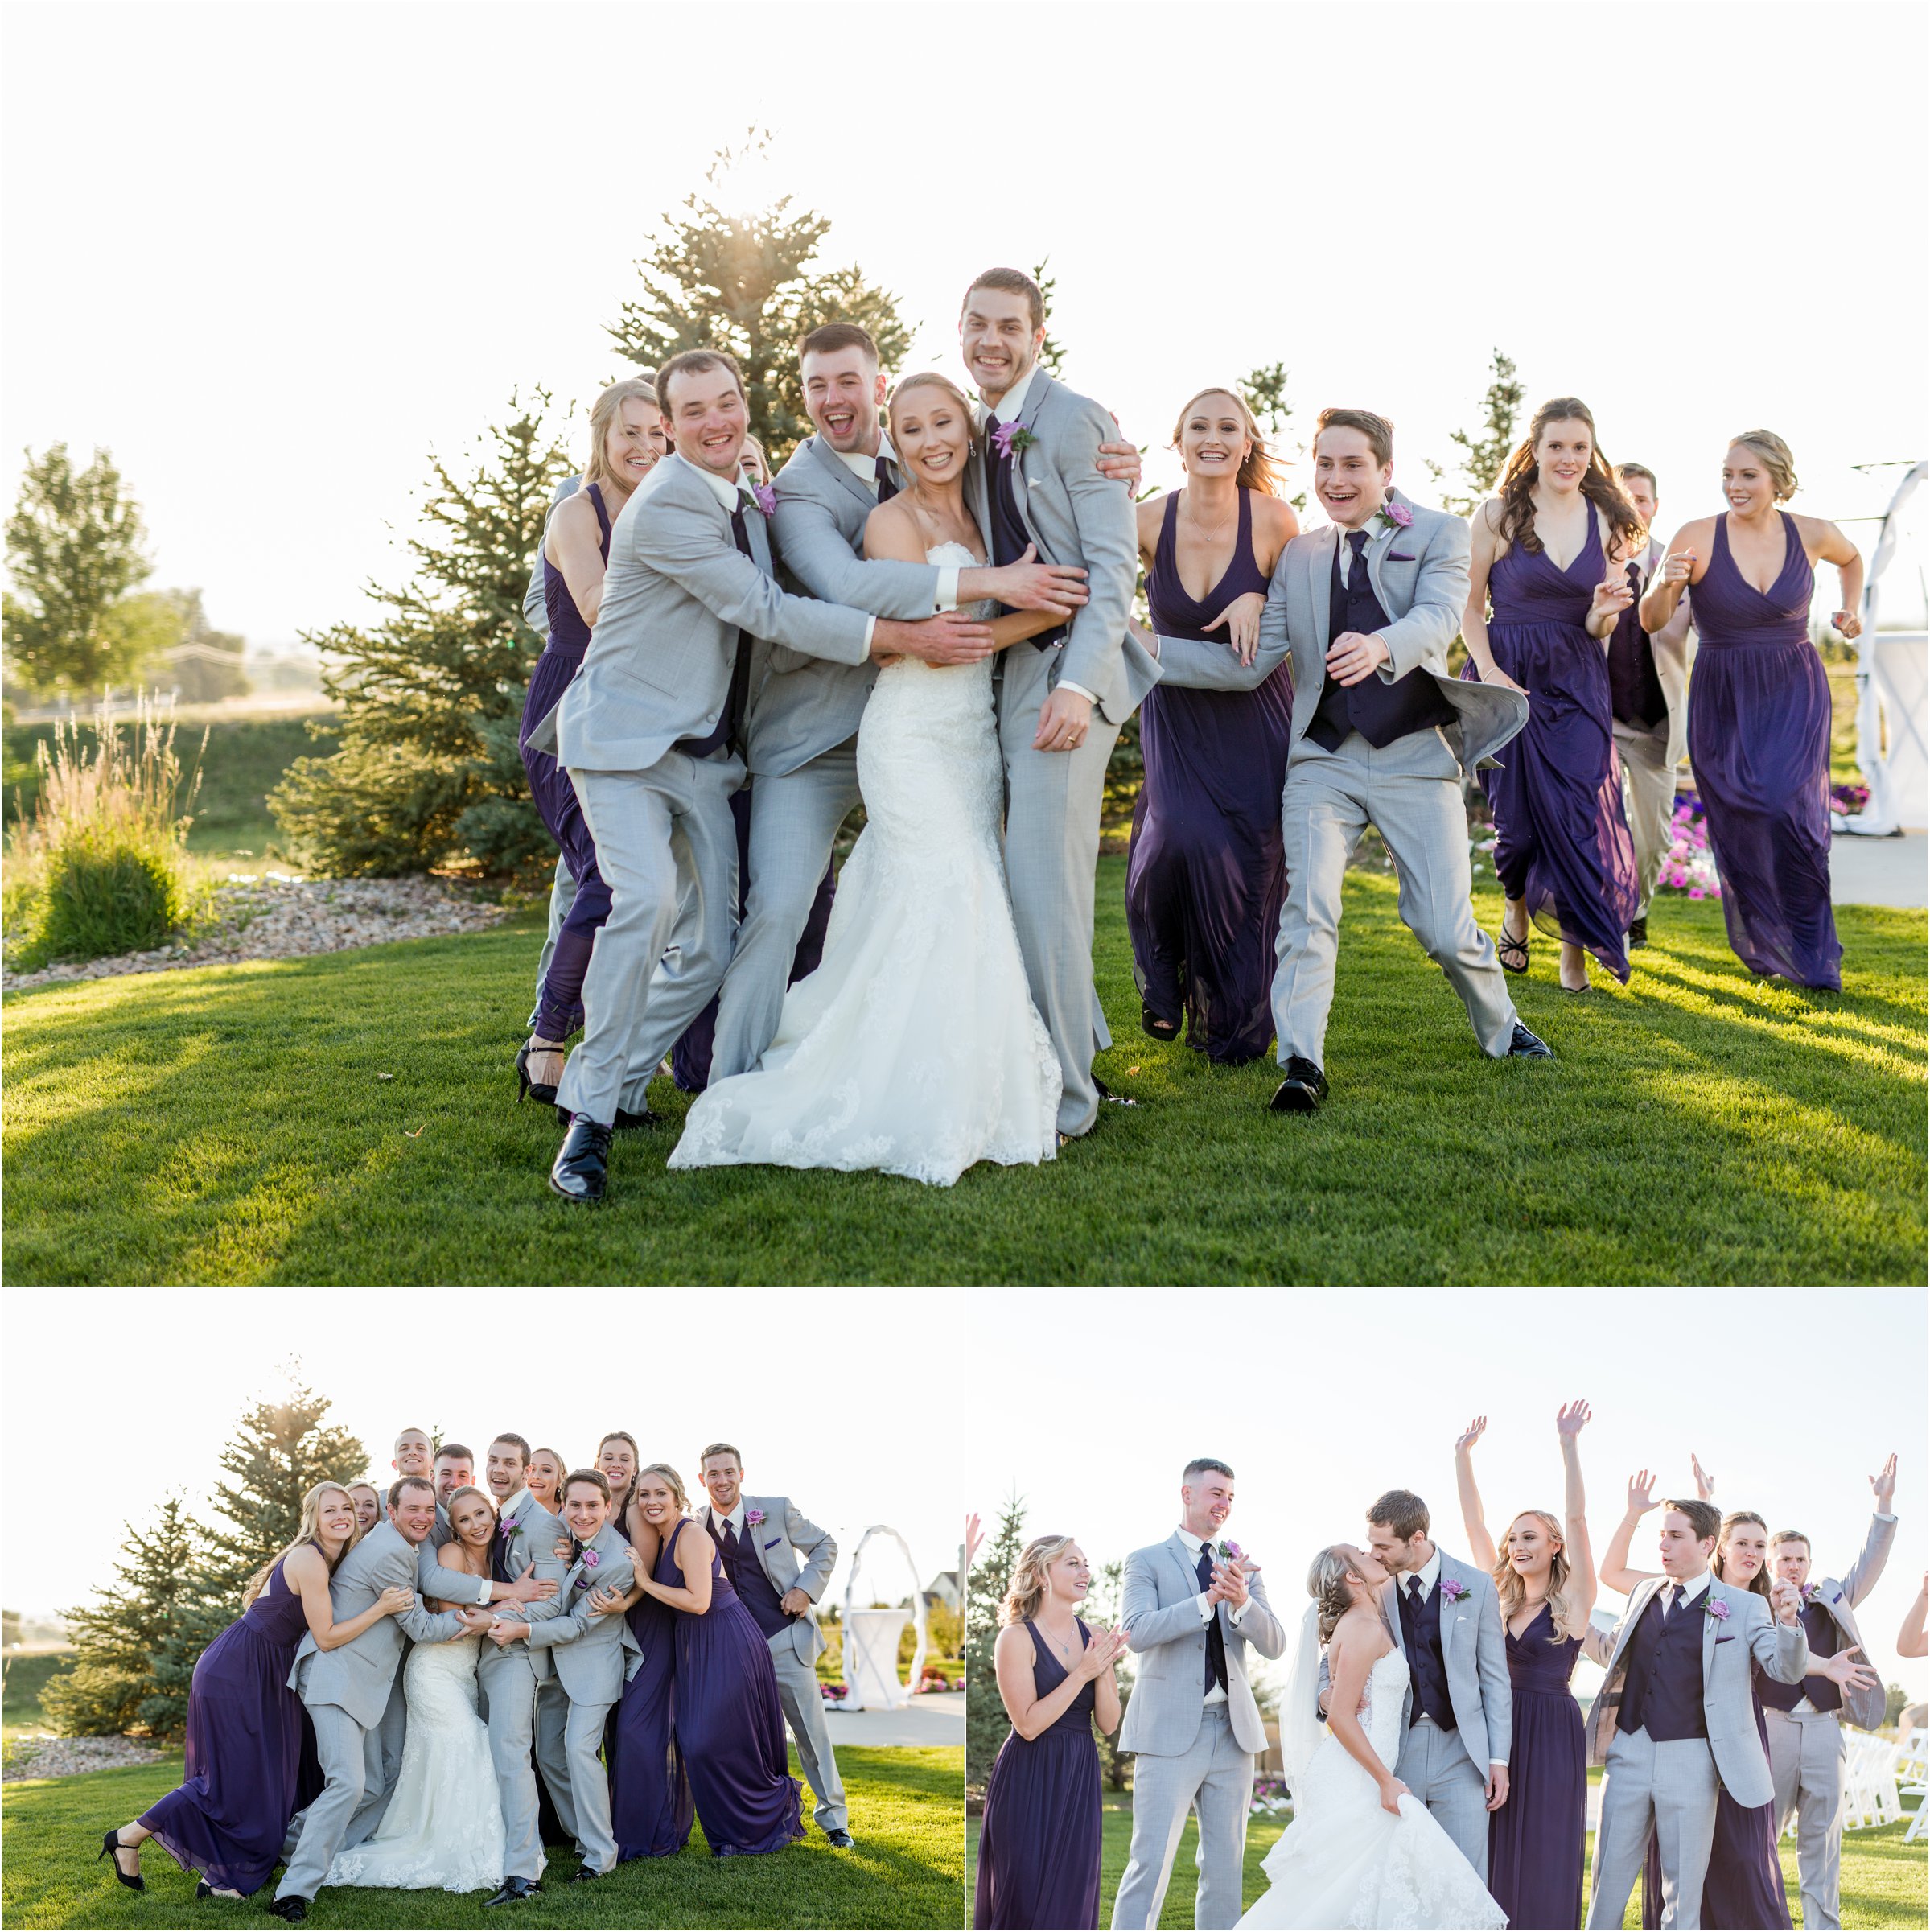 bride and groom surrounded by their bridal party celebrating after their ceremony